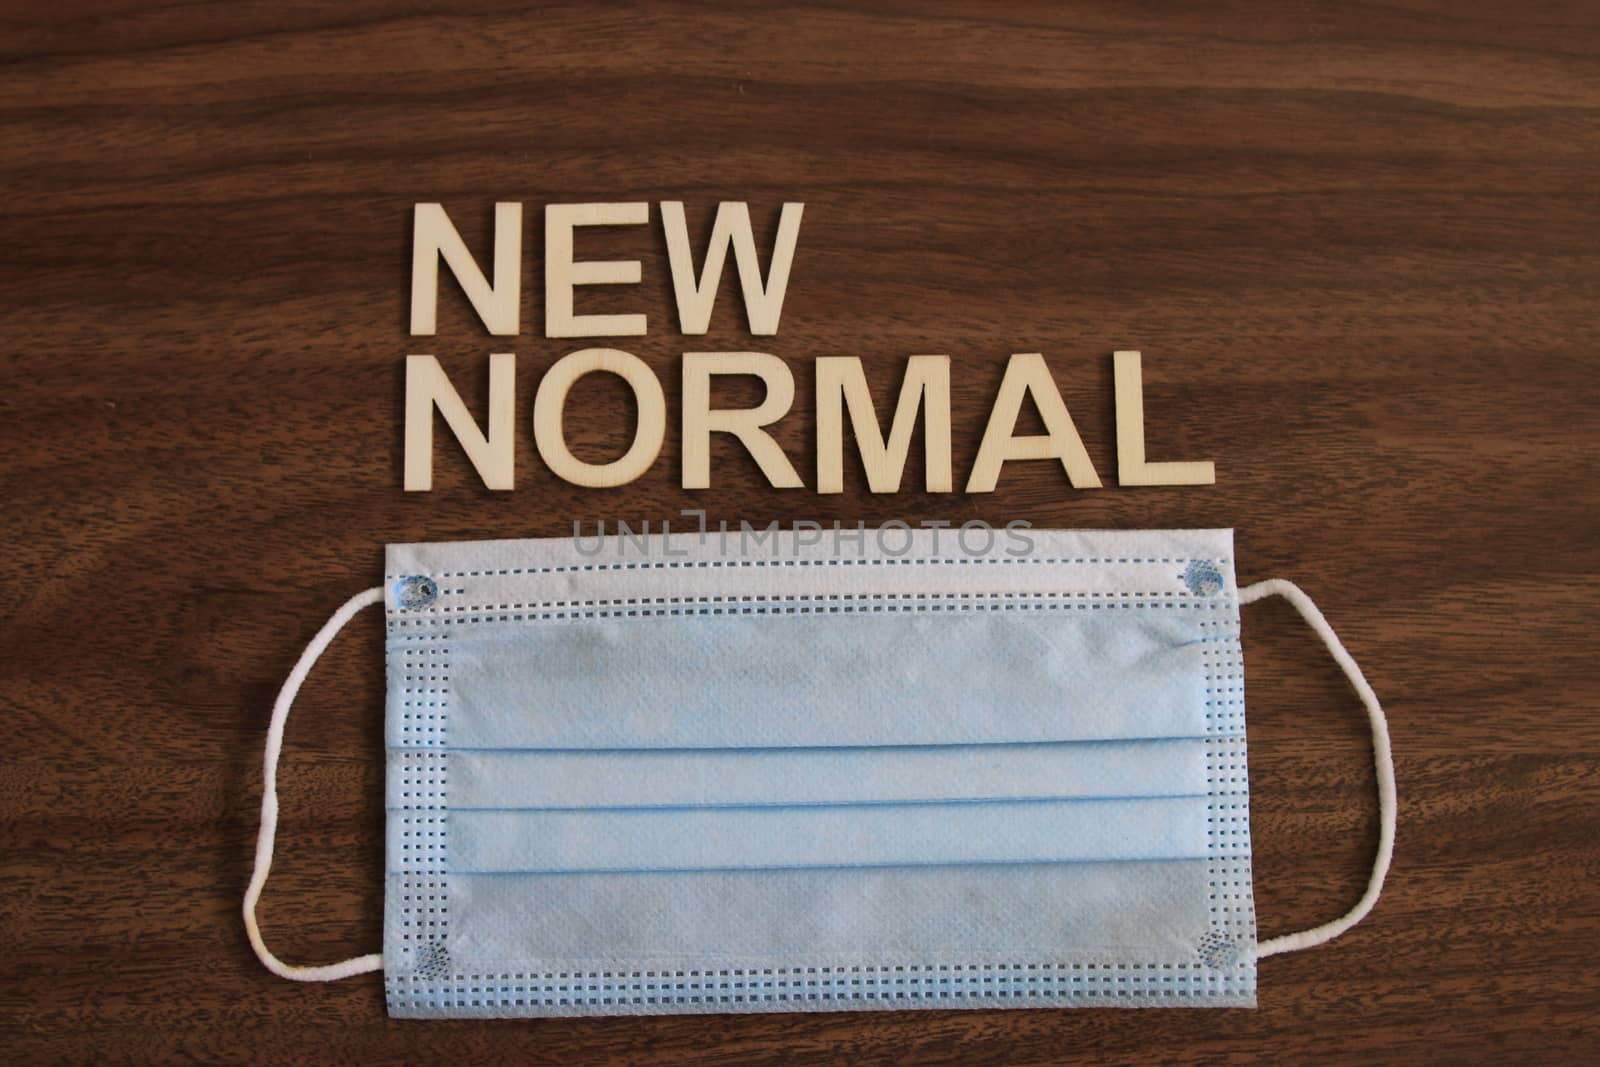 the term new normal on wood background by mynewturtle1